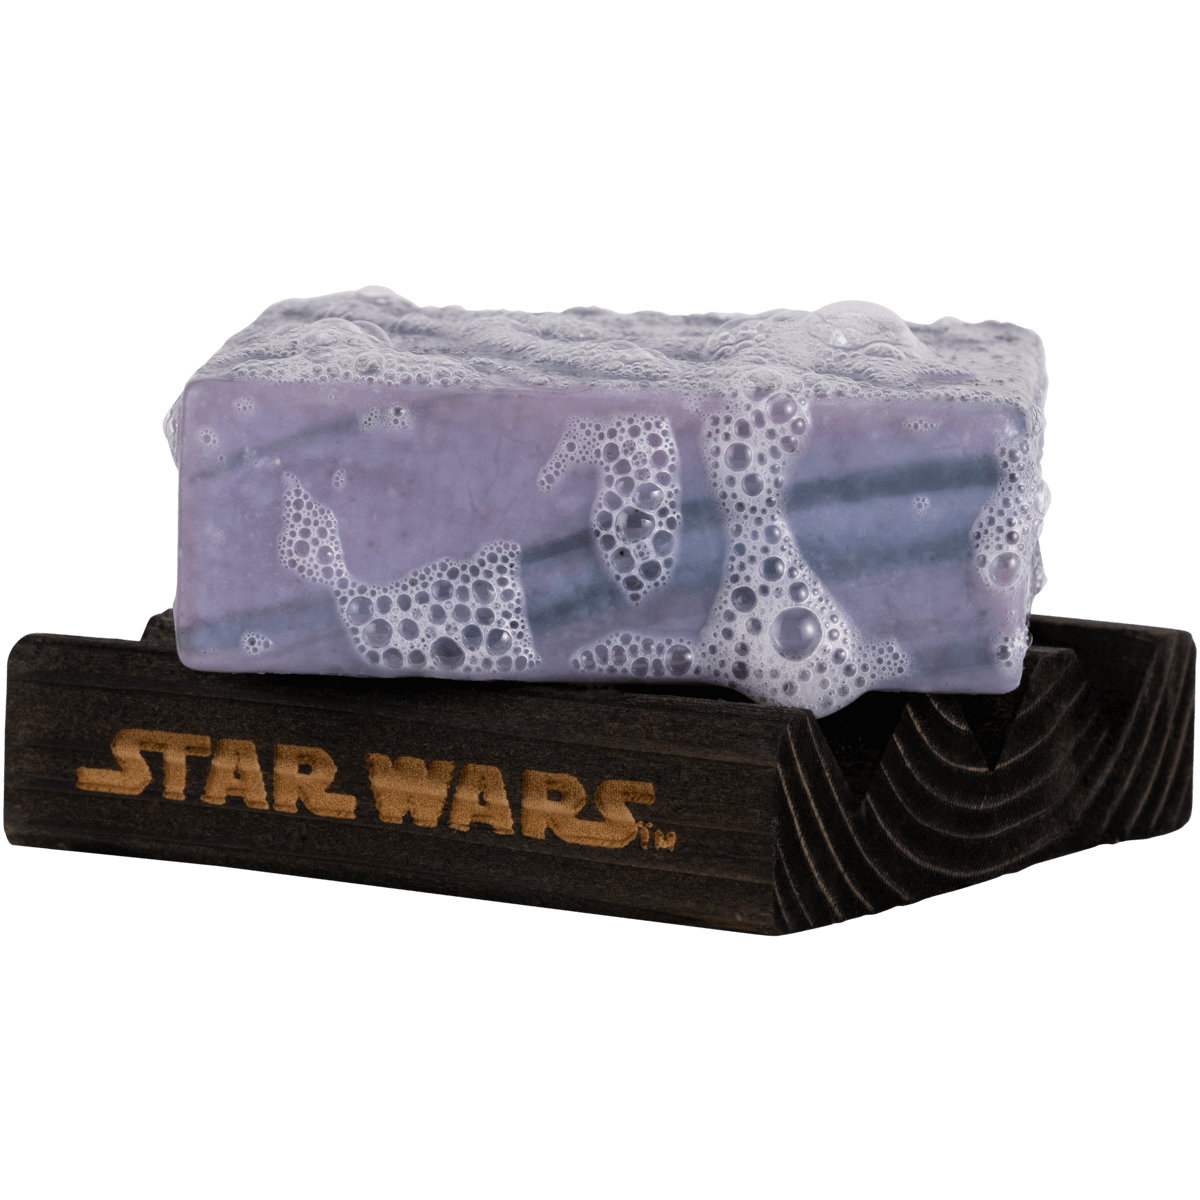 The Star Wars™ Soap Saver